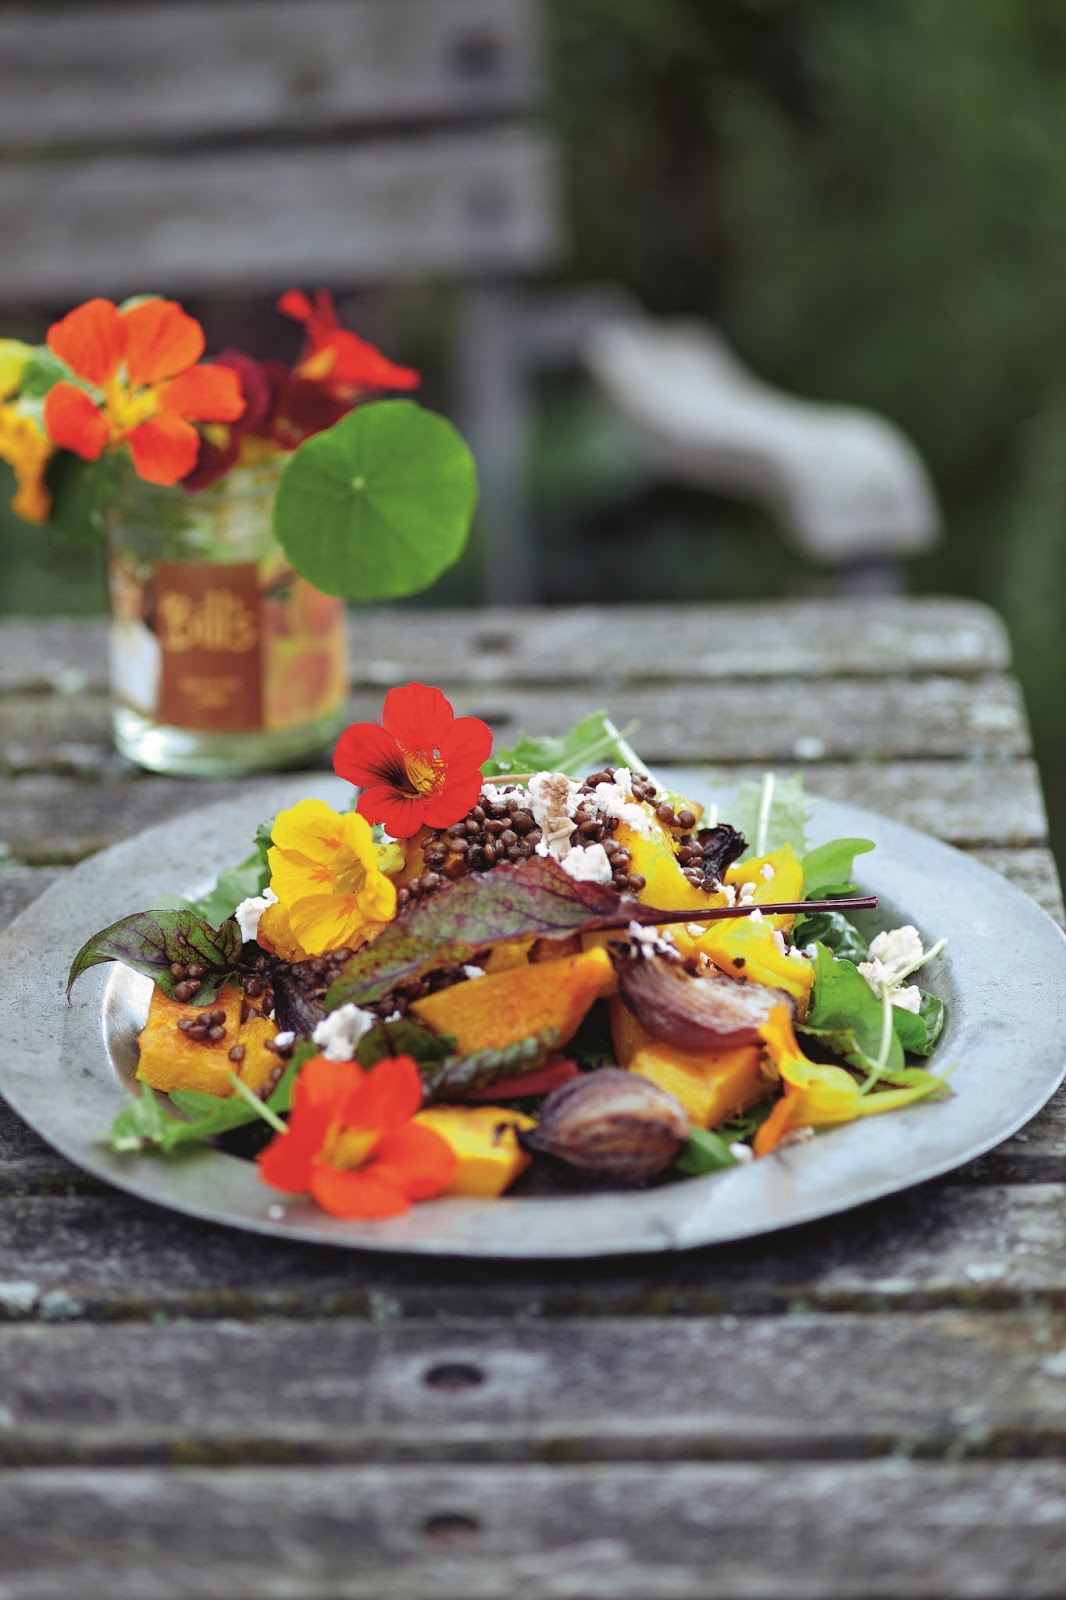 Warm Pumpkin and Lentil Salad with Goat’s Cheese